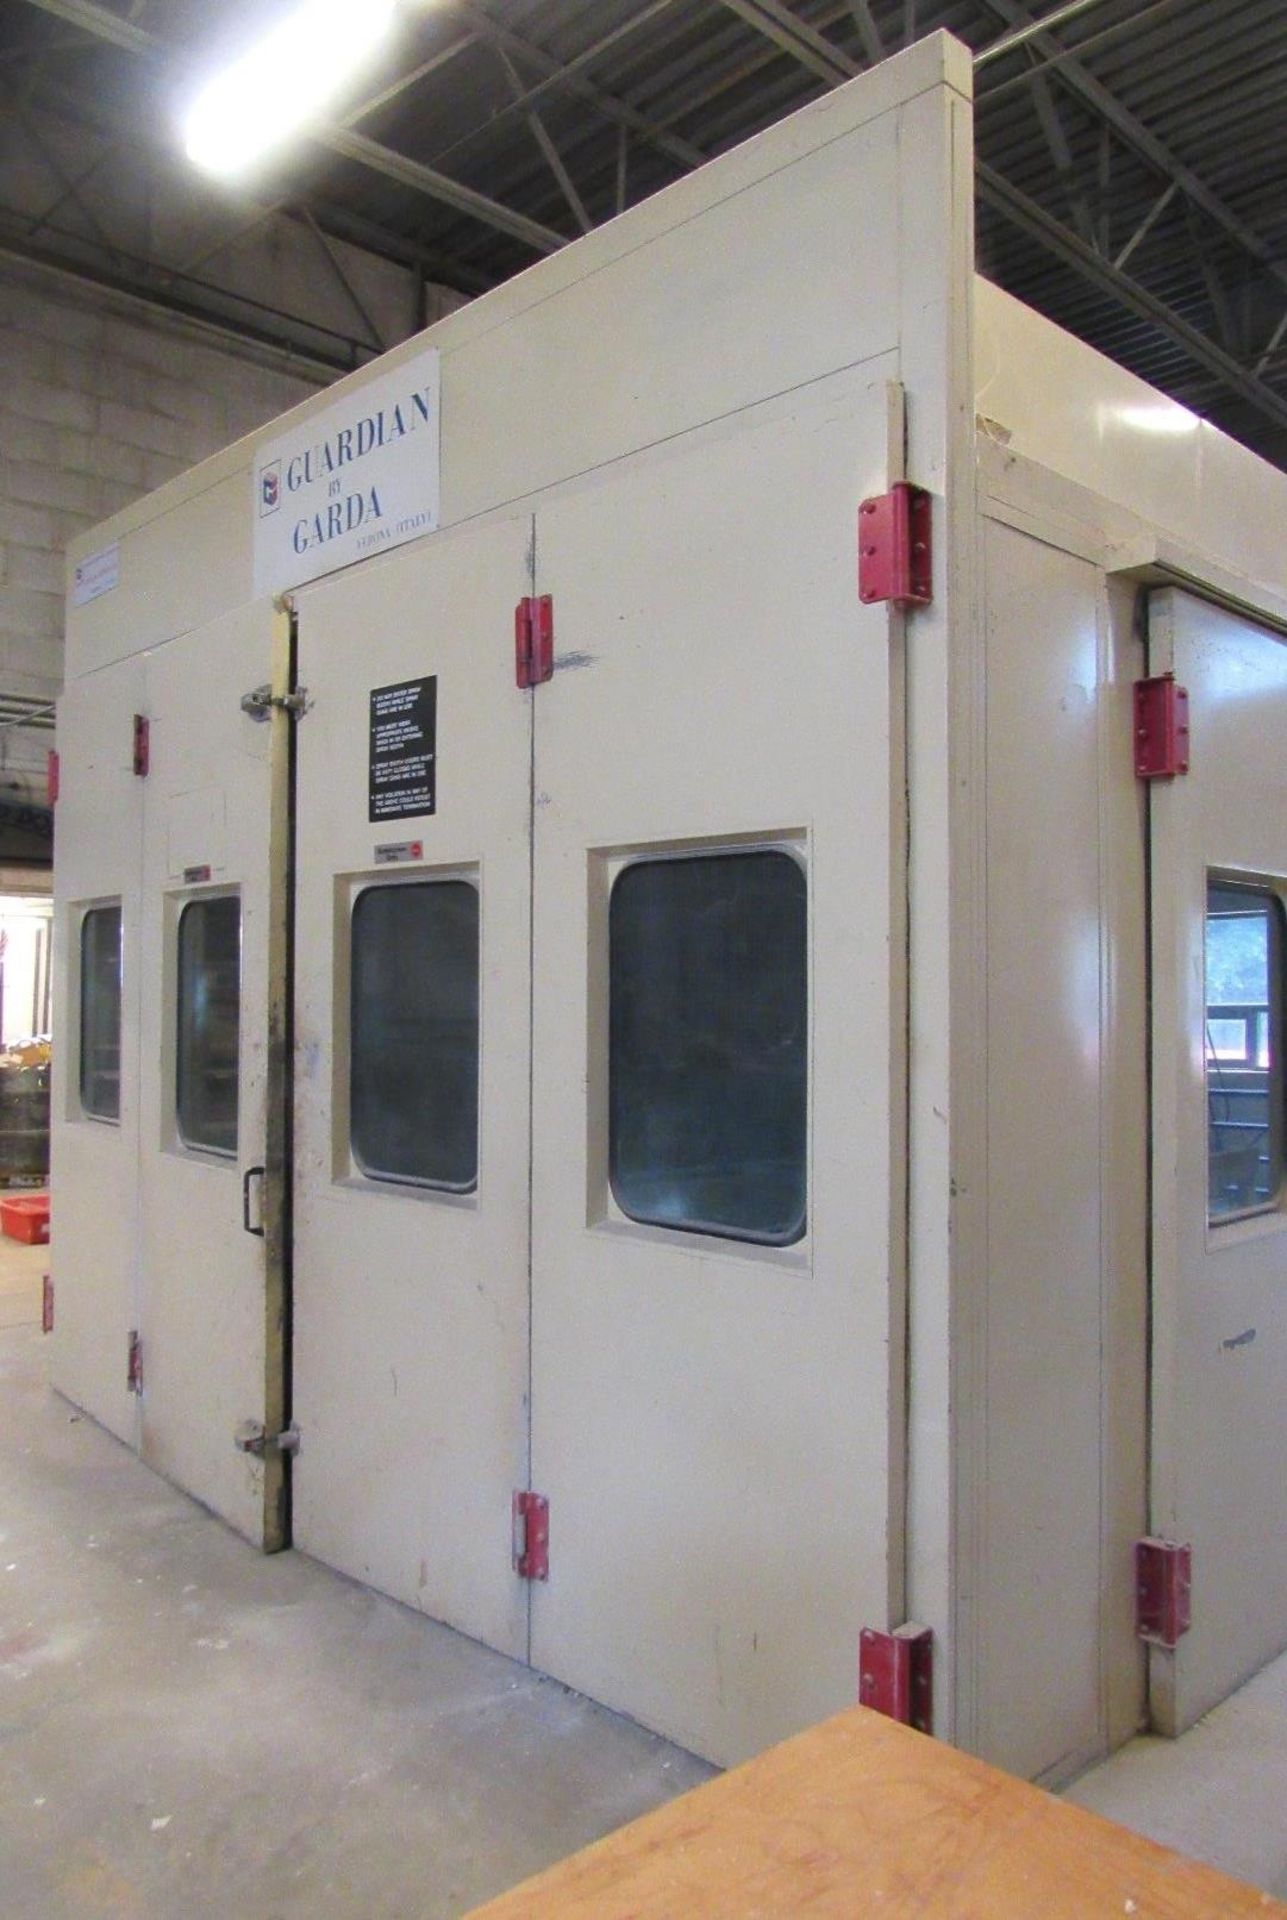 Guardian Garda 13'W x 23'L x 9'H Totally Enclosed Paint Booth - Image 9 of 10